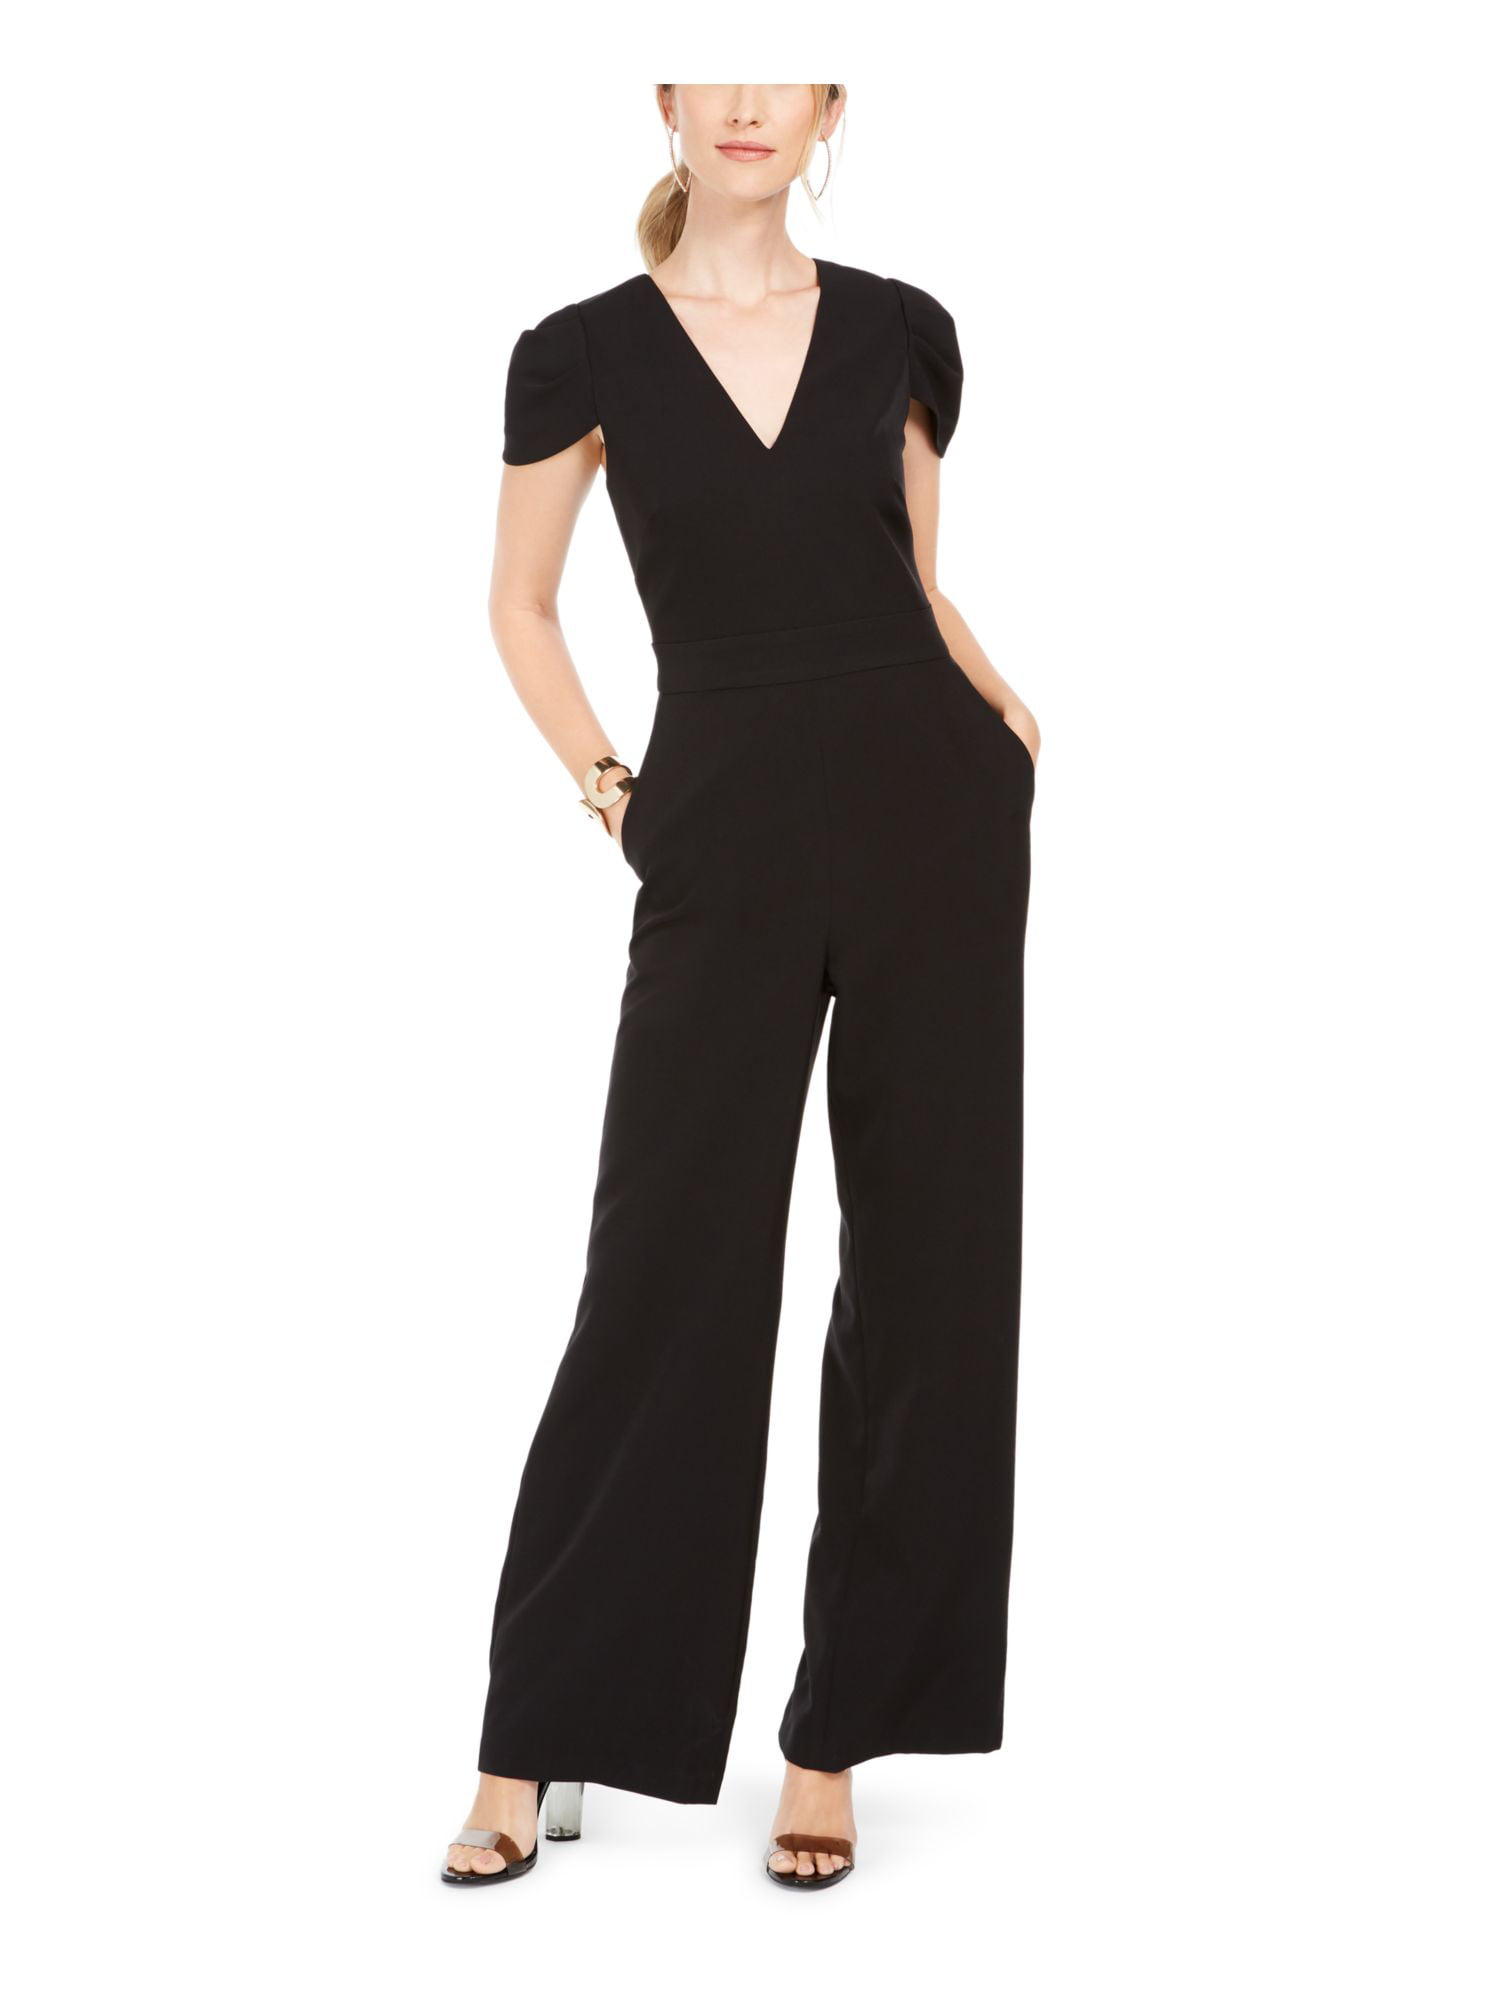 John Richmond Synthetic Jumpsuit in Black Womens Clothing Jumpsuits and rompers Full-length jumpsuits and rompers 